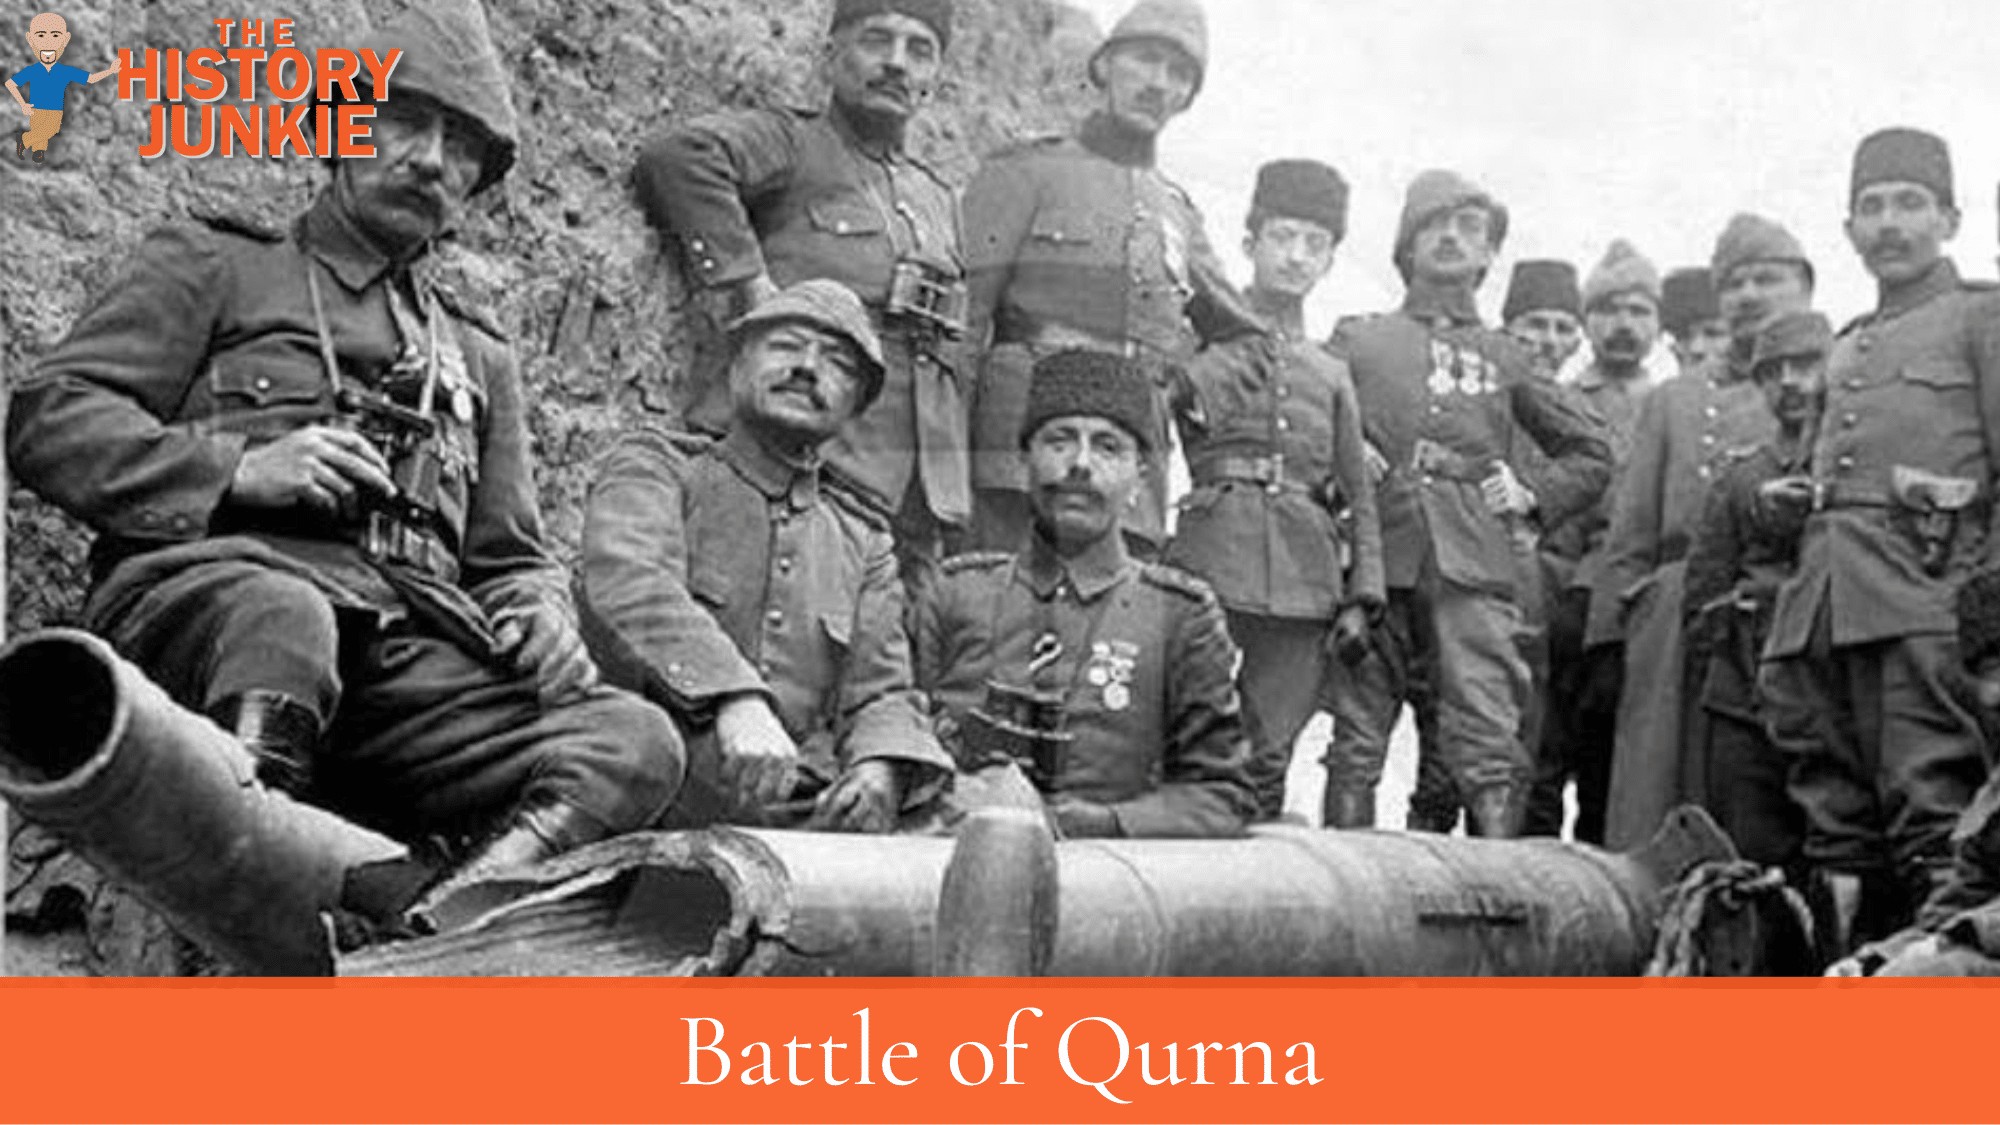 Battle of Qurna